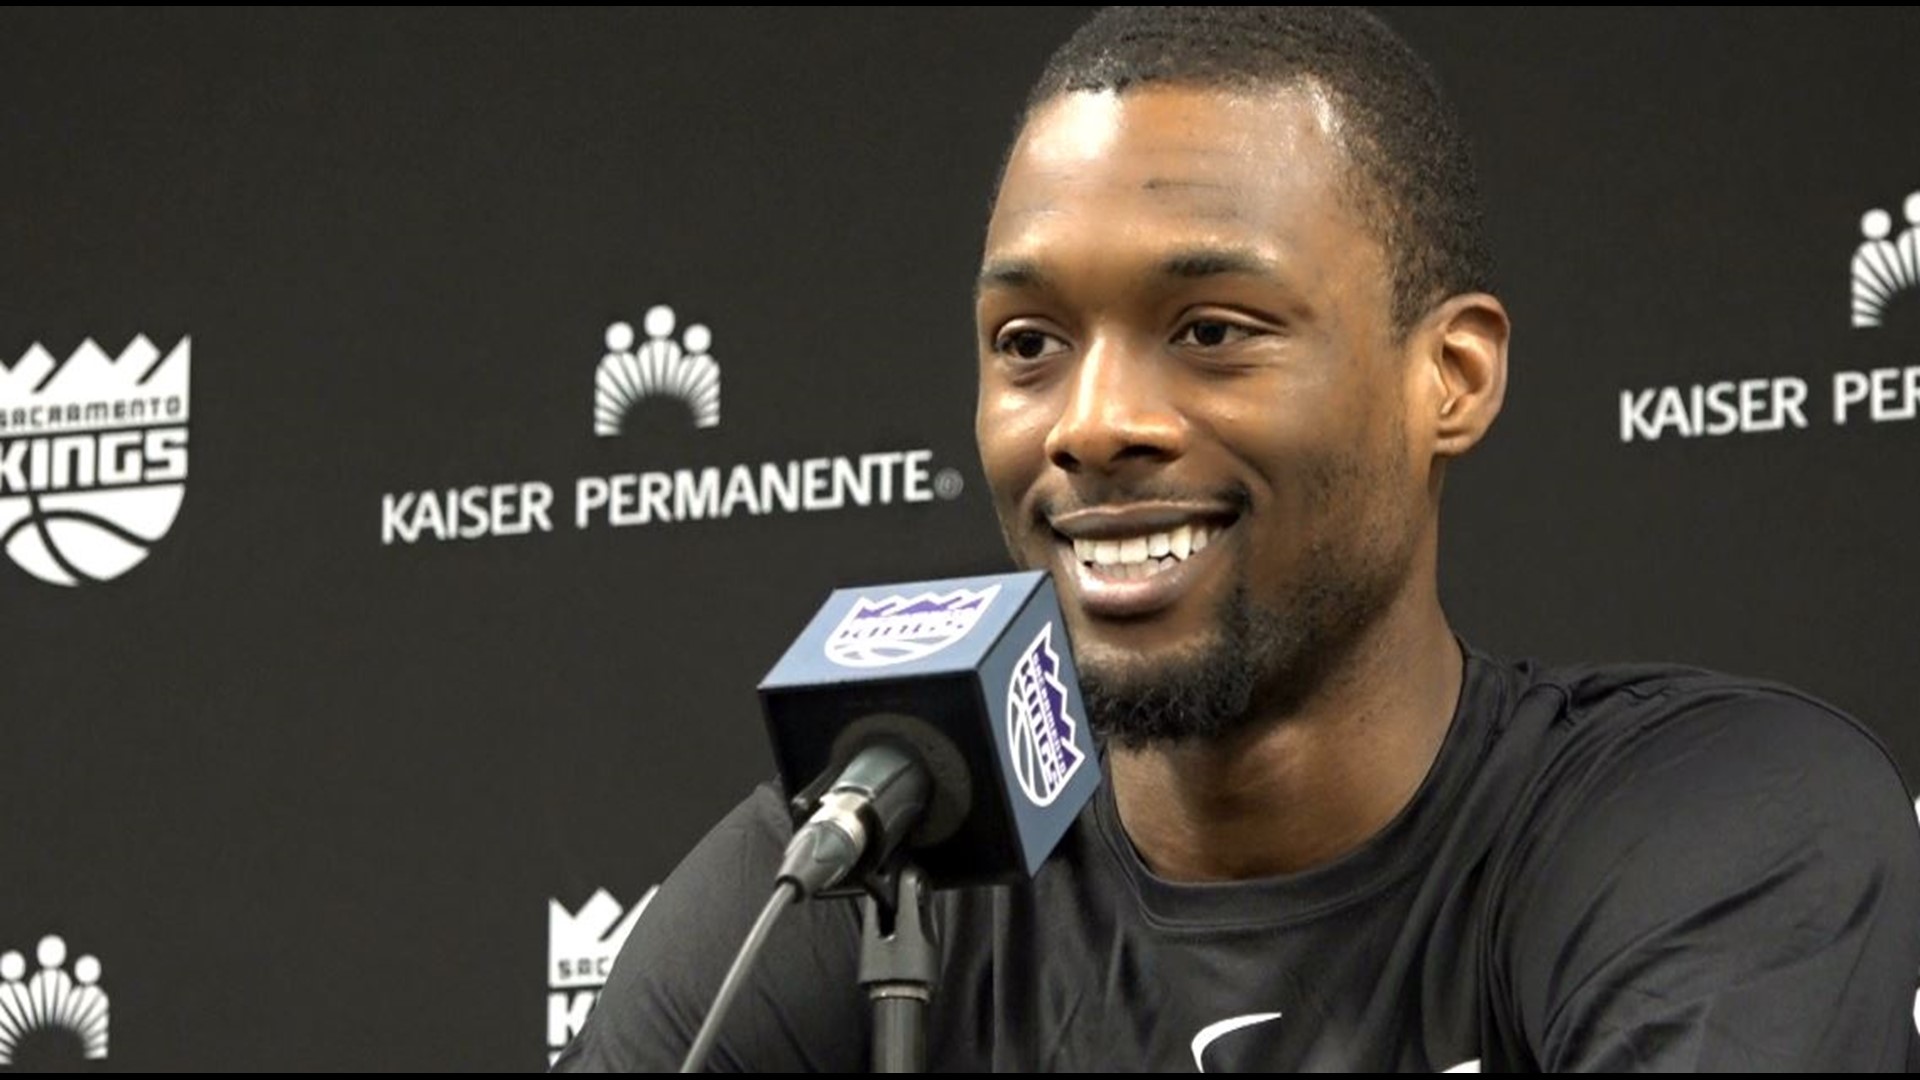 The Sacramento Kings introduce Harrison Barnes and Alec Burks, two of the team's new players, on Friday morning, both of whom were acquired before Thursday's NBA trade deadline.